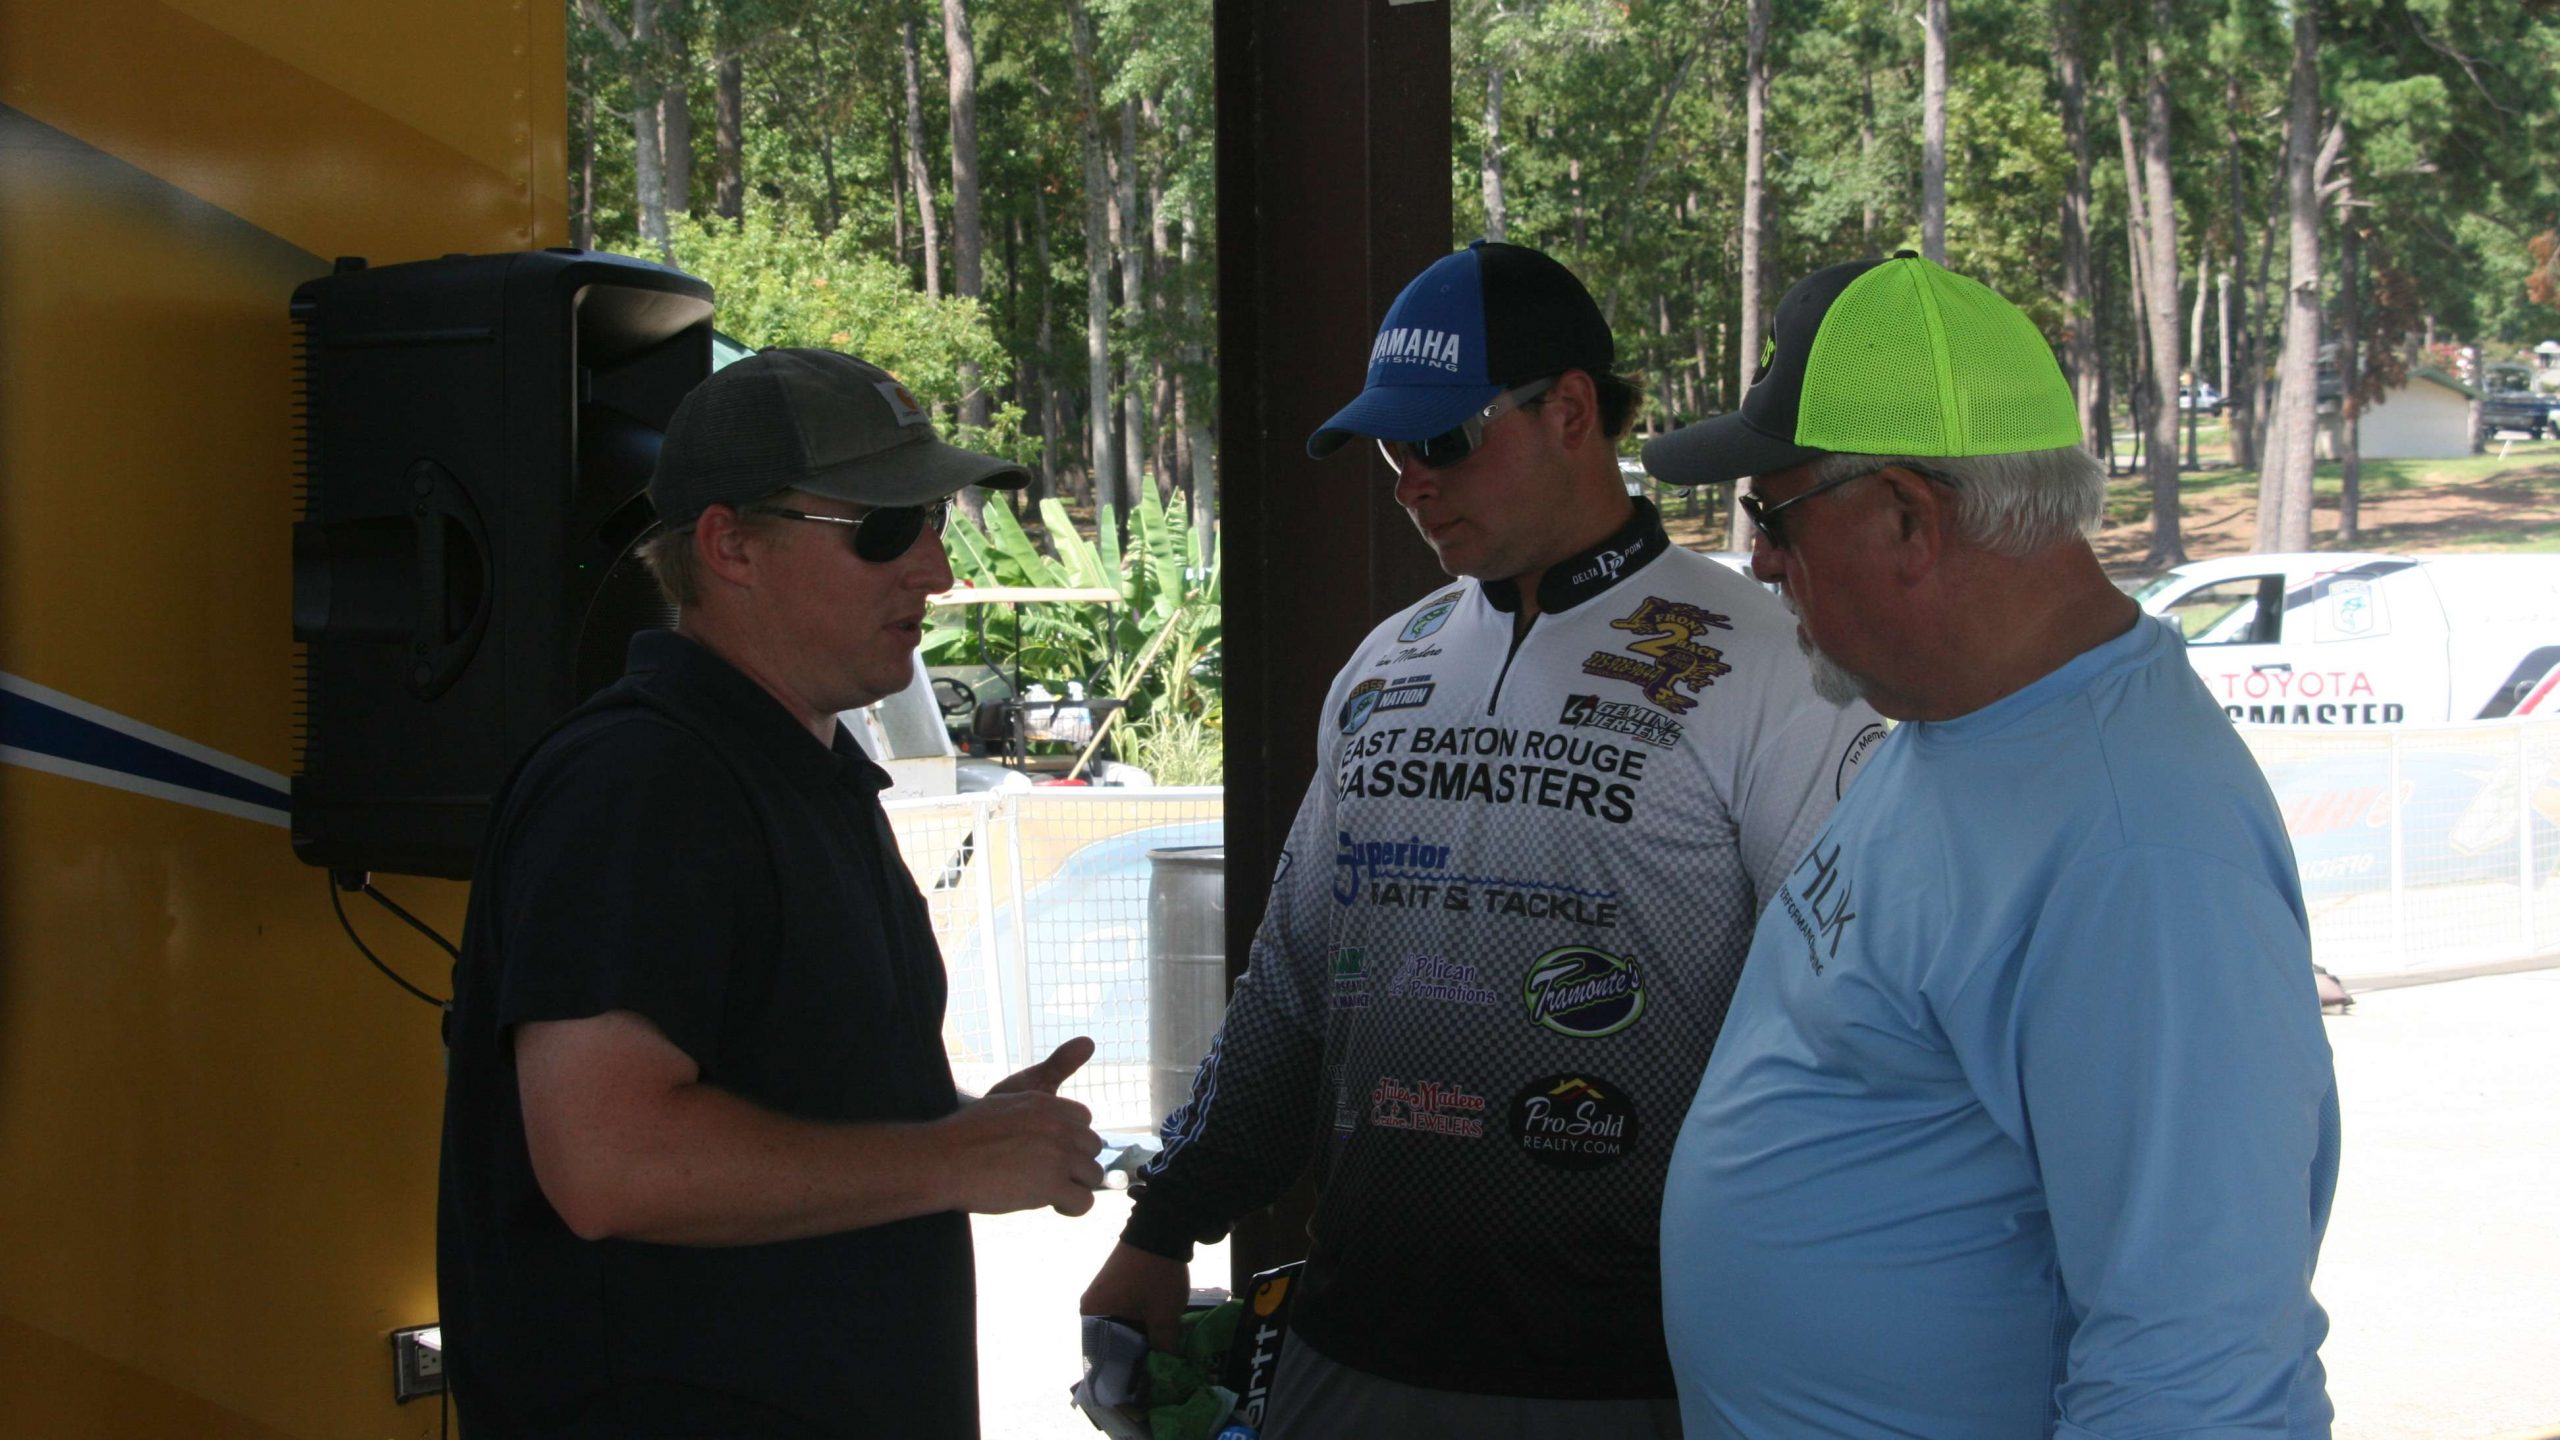 Tournament Director Hank Weldon of B.A.S.S speaks to Ian Madere of Baton Rouge an Jim Welverton during registration.